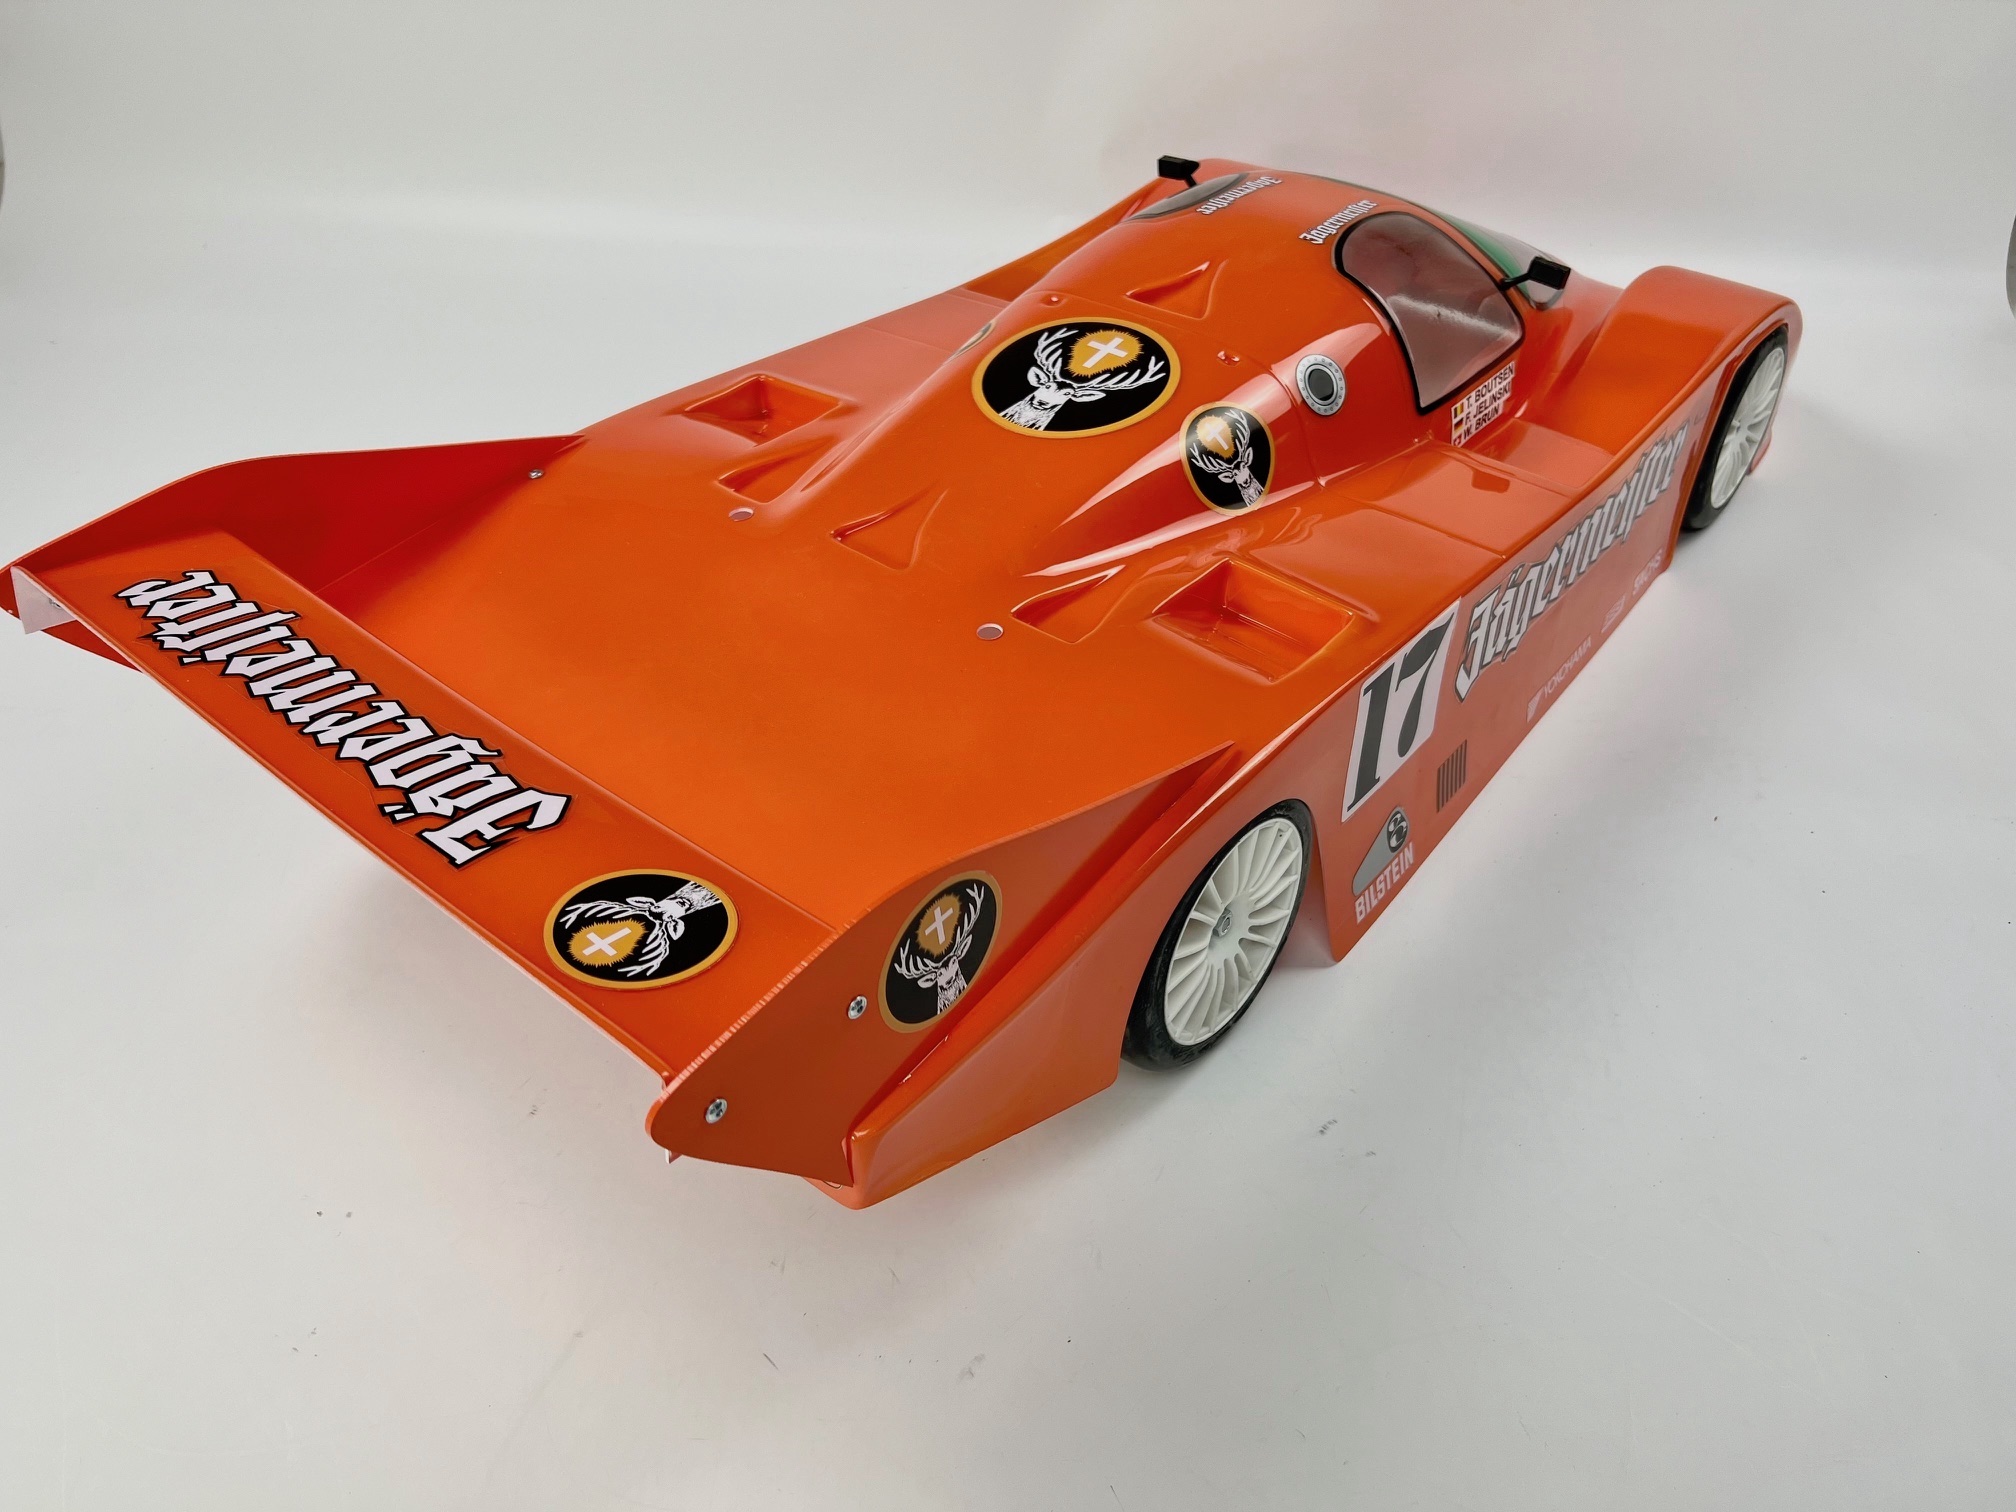 Painted Porsche 962C body 1:5 for 530/535 mm wheelbase with rear spoiler, drilled